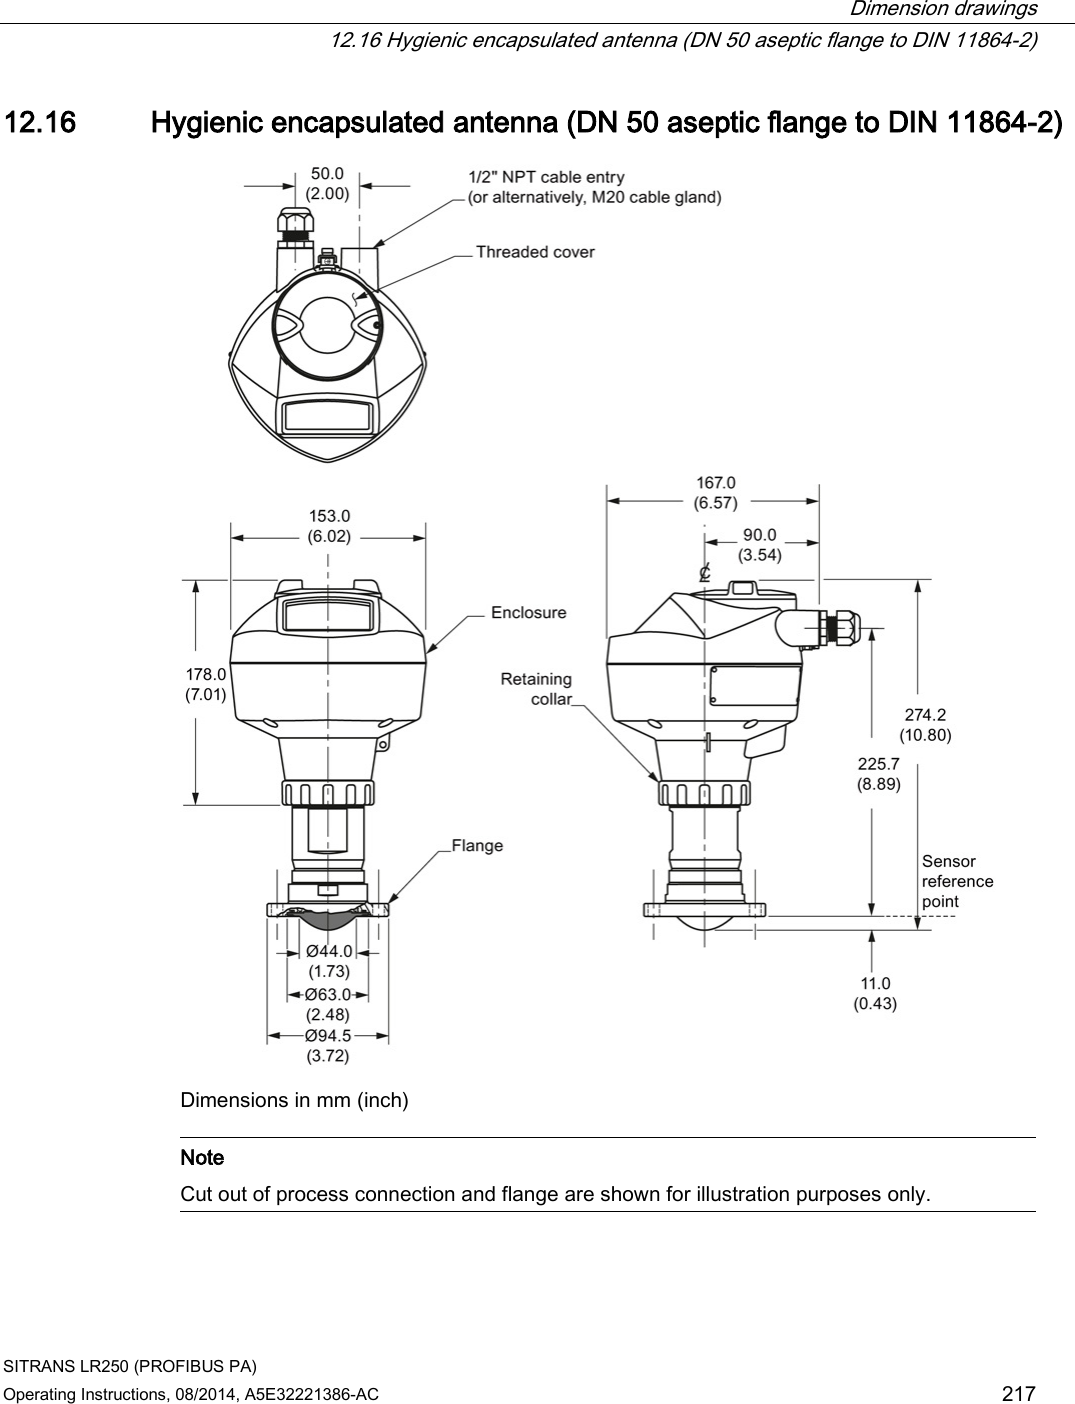  Dimension drawings  12.16 Hygienic encapsulated antenna (DN 50 aseptic flange to DIN 11864-2) SITRANS LR250 (PROFIBUS PA) Operating Instructions, 08/2014, A5E32221386-AC 217 12.16 Hygienic encapsulated antenna (DN 50 aseptic flange to DIN 11864-2)  Dimensions in mm (inch)   Note Cut out of process connection and flange are shown for illustration purposes only.   